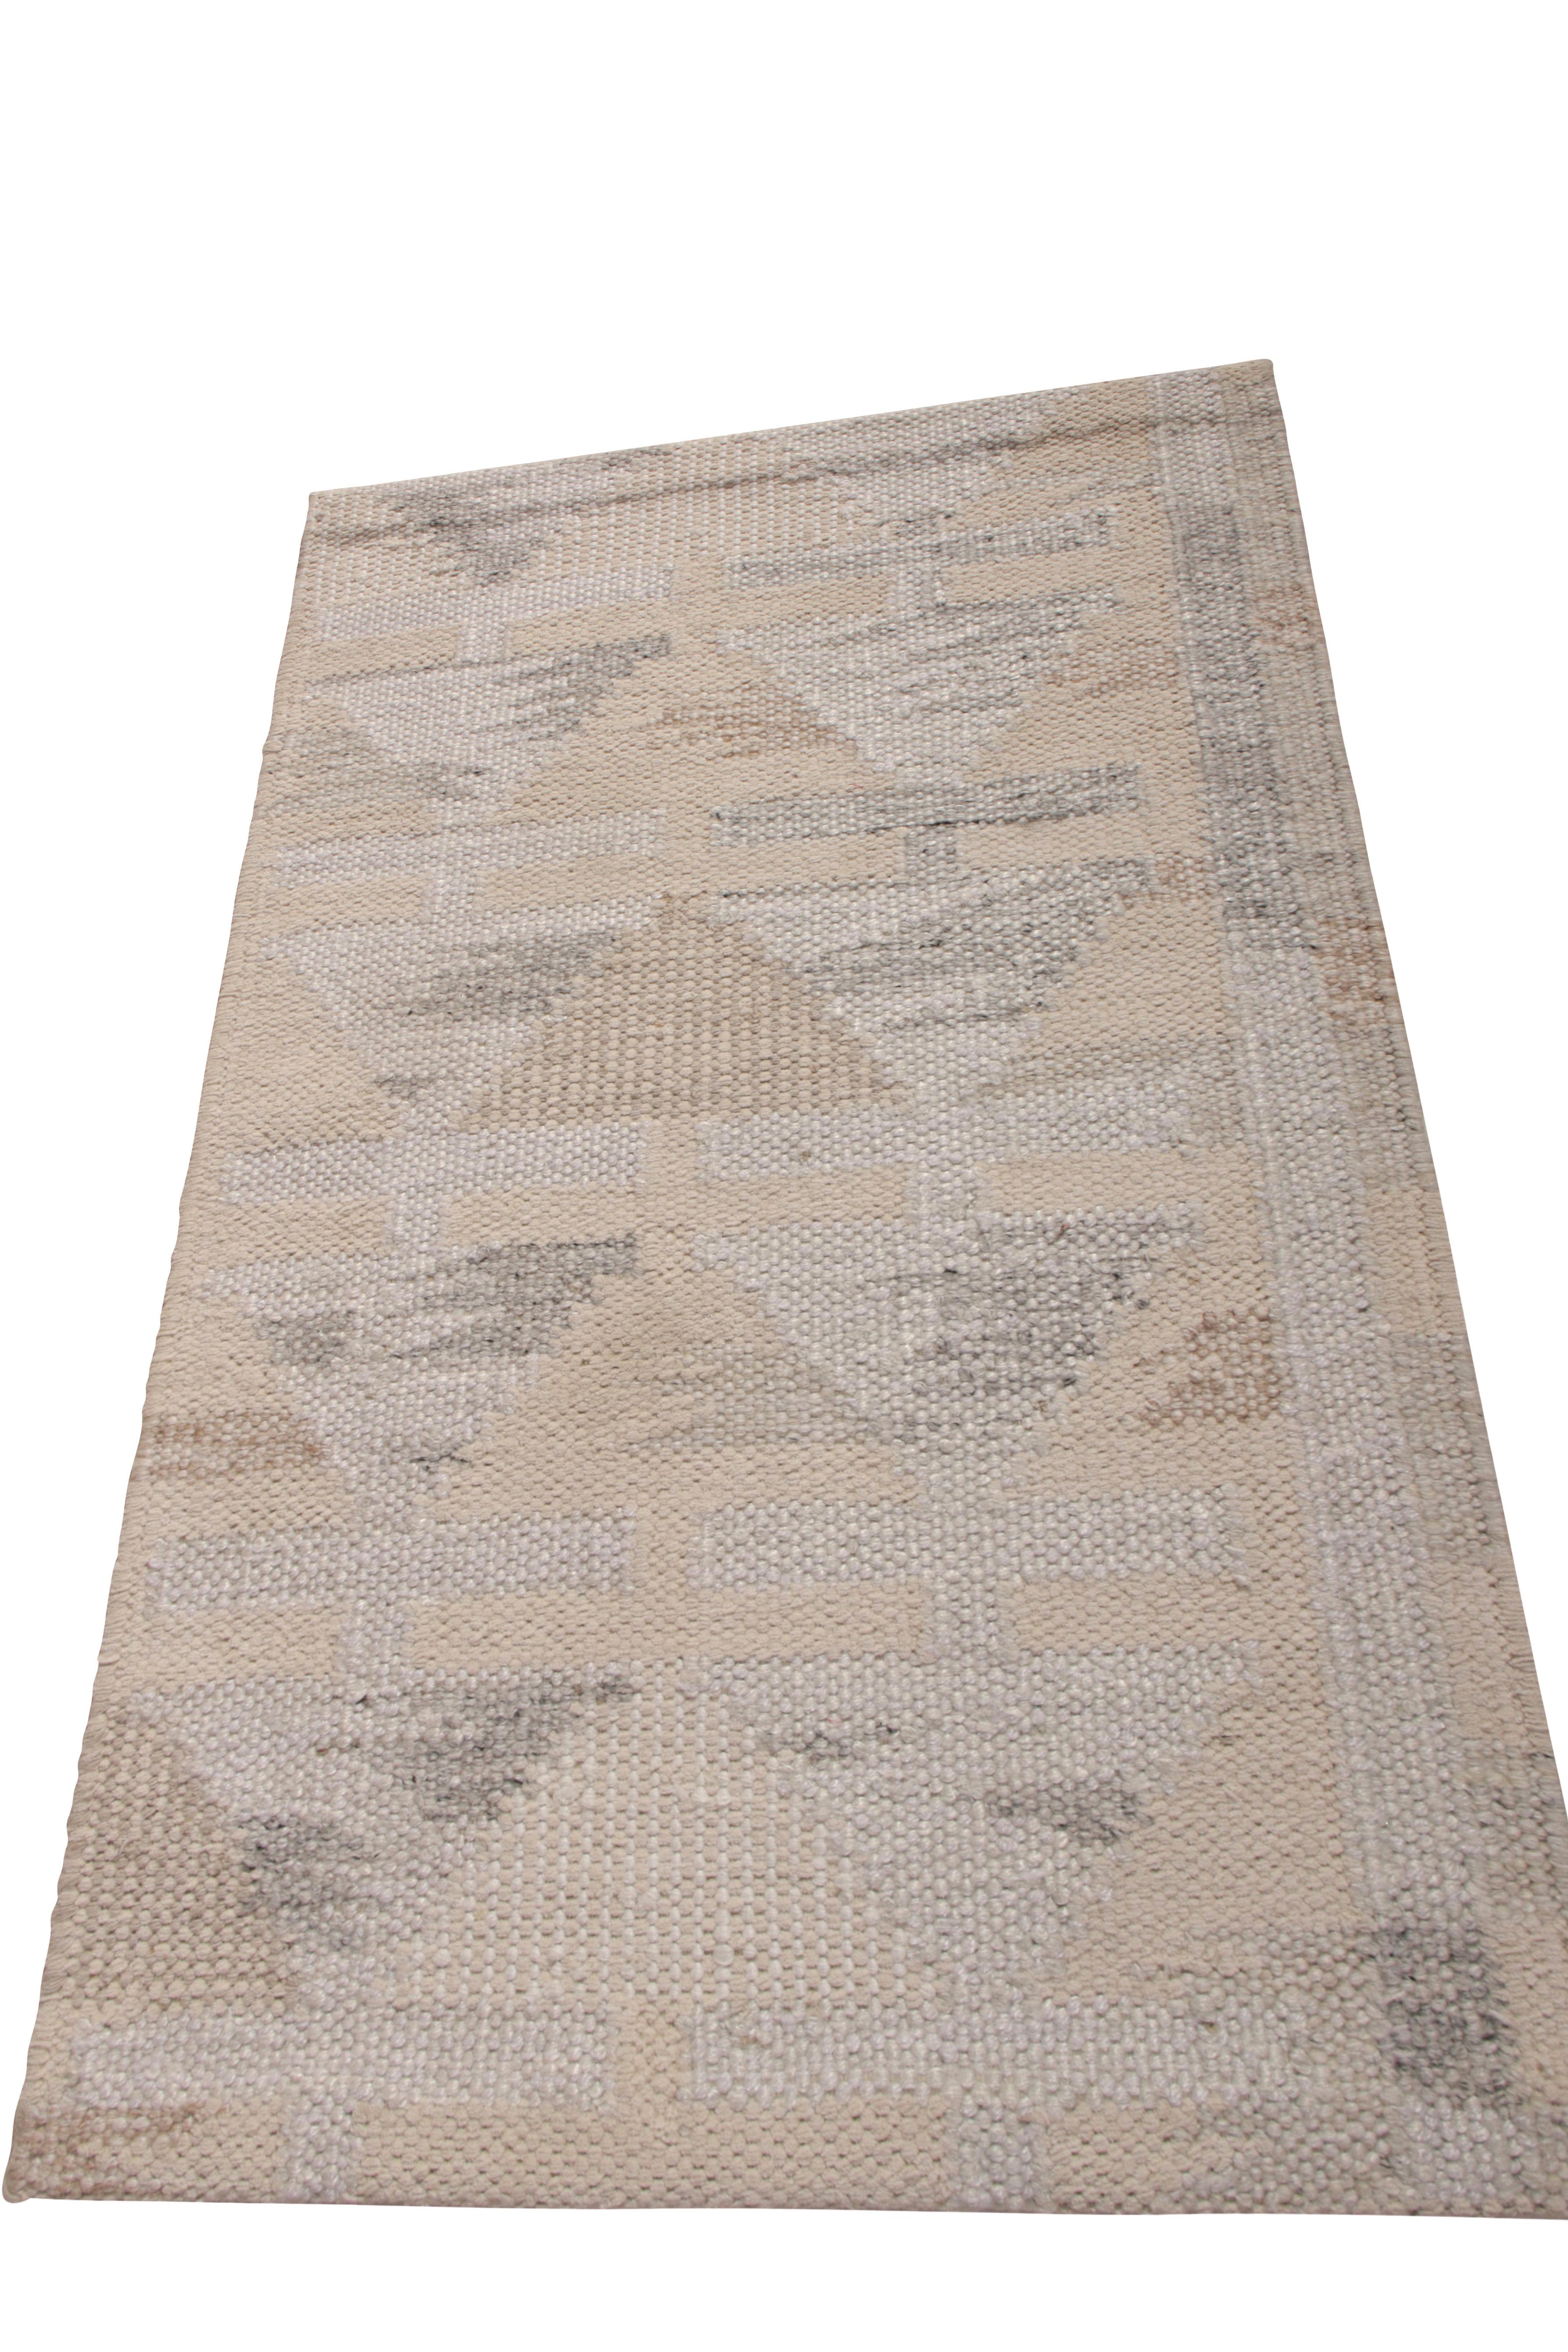 This 2x3 Kilim hails from the gift-size selections of Rug & Kilim’s Scandinavian Collection, remarking a bold take on Swedish Deco styles. This flat weave enjoys crisp white accents in a cool silver-gray colorway with beige-brown geometric patterns.